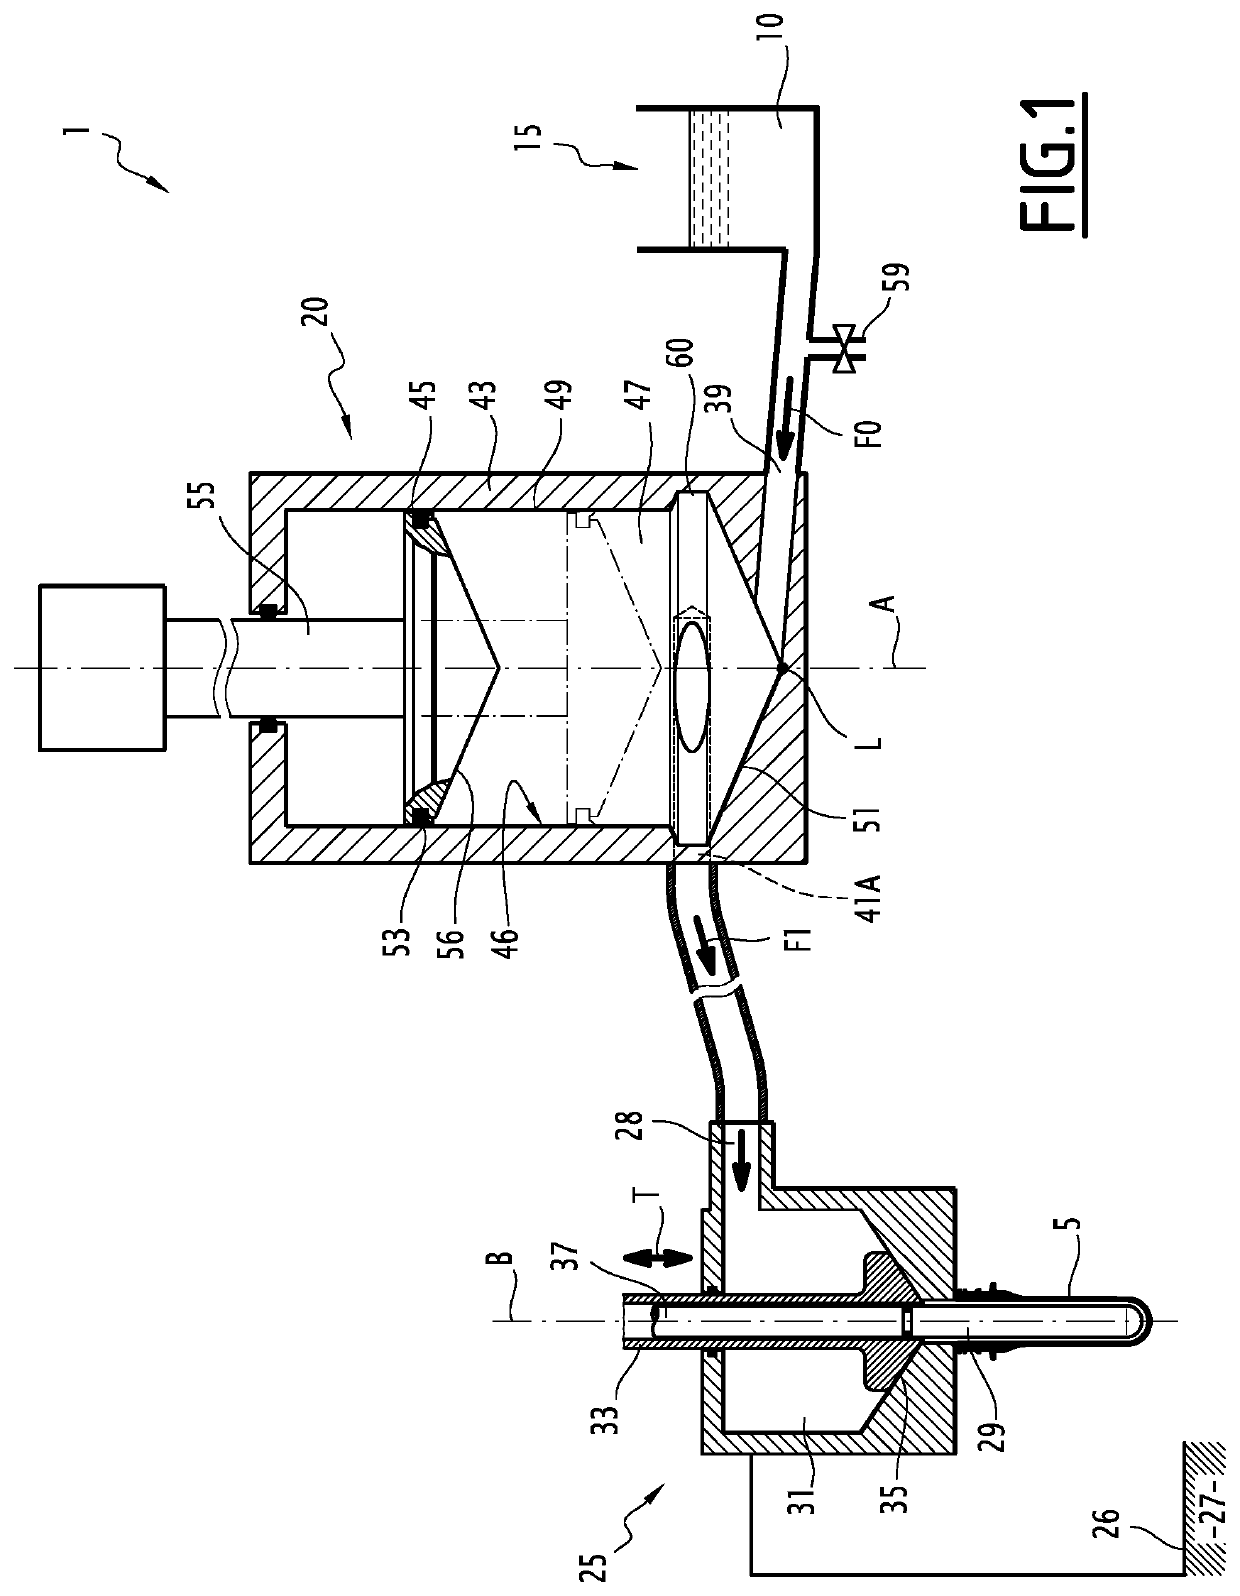 Injection device for a forming and filing a container using a pressurized liquid